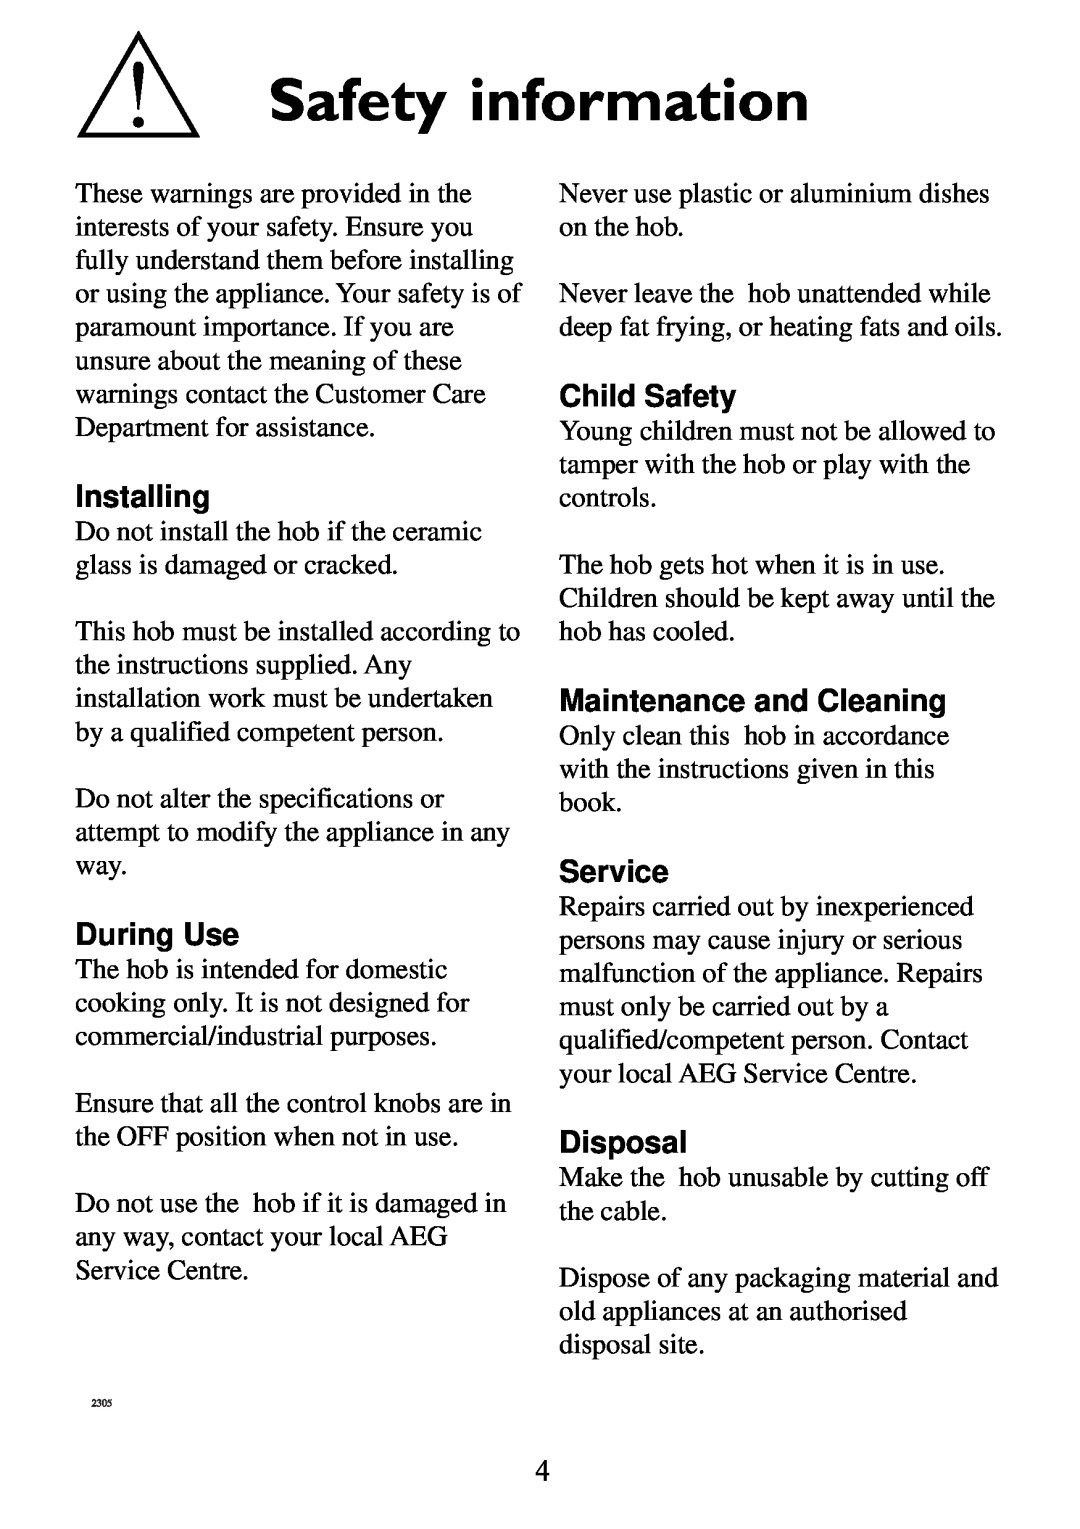 Electrolux 6561 G-m GB manual Safety information, Installing, During Use, Child Safety, Maintenance and Cleaning, Service 